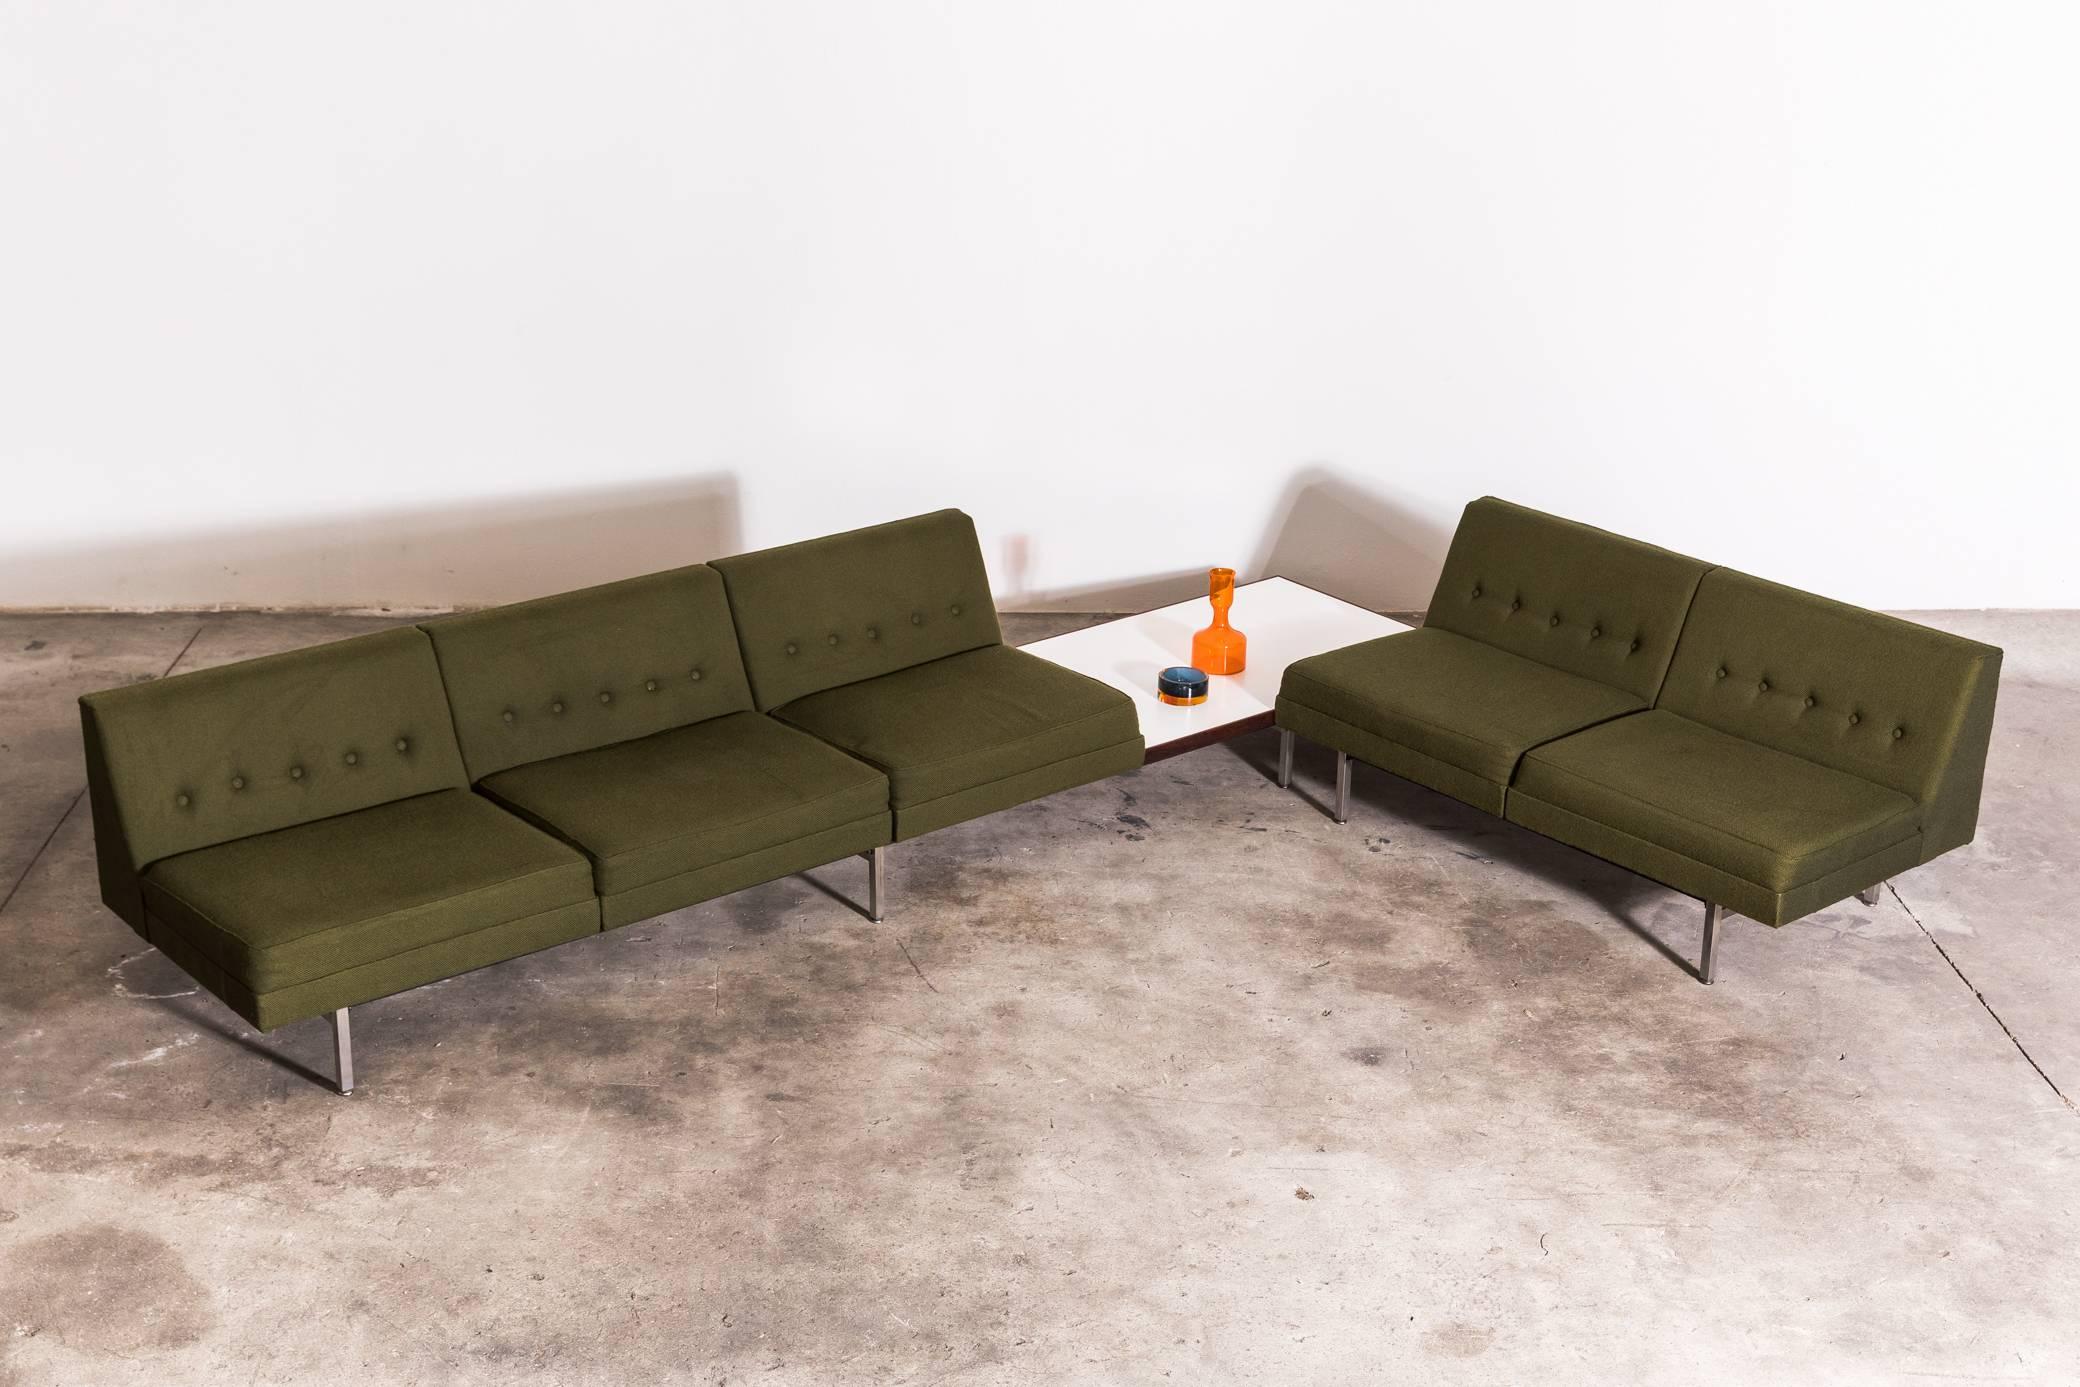 This exceptional modular piece by George Nelson for Herman Miller was produced in 1968. A sectional sofa created by combining two sofas, features three armless seats, a formica table, and a two-seat sofa. They can be arranged in an order that suits